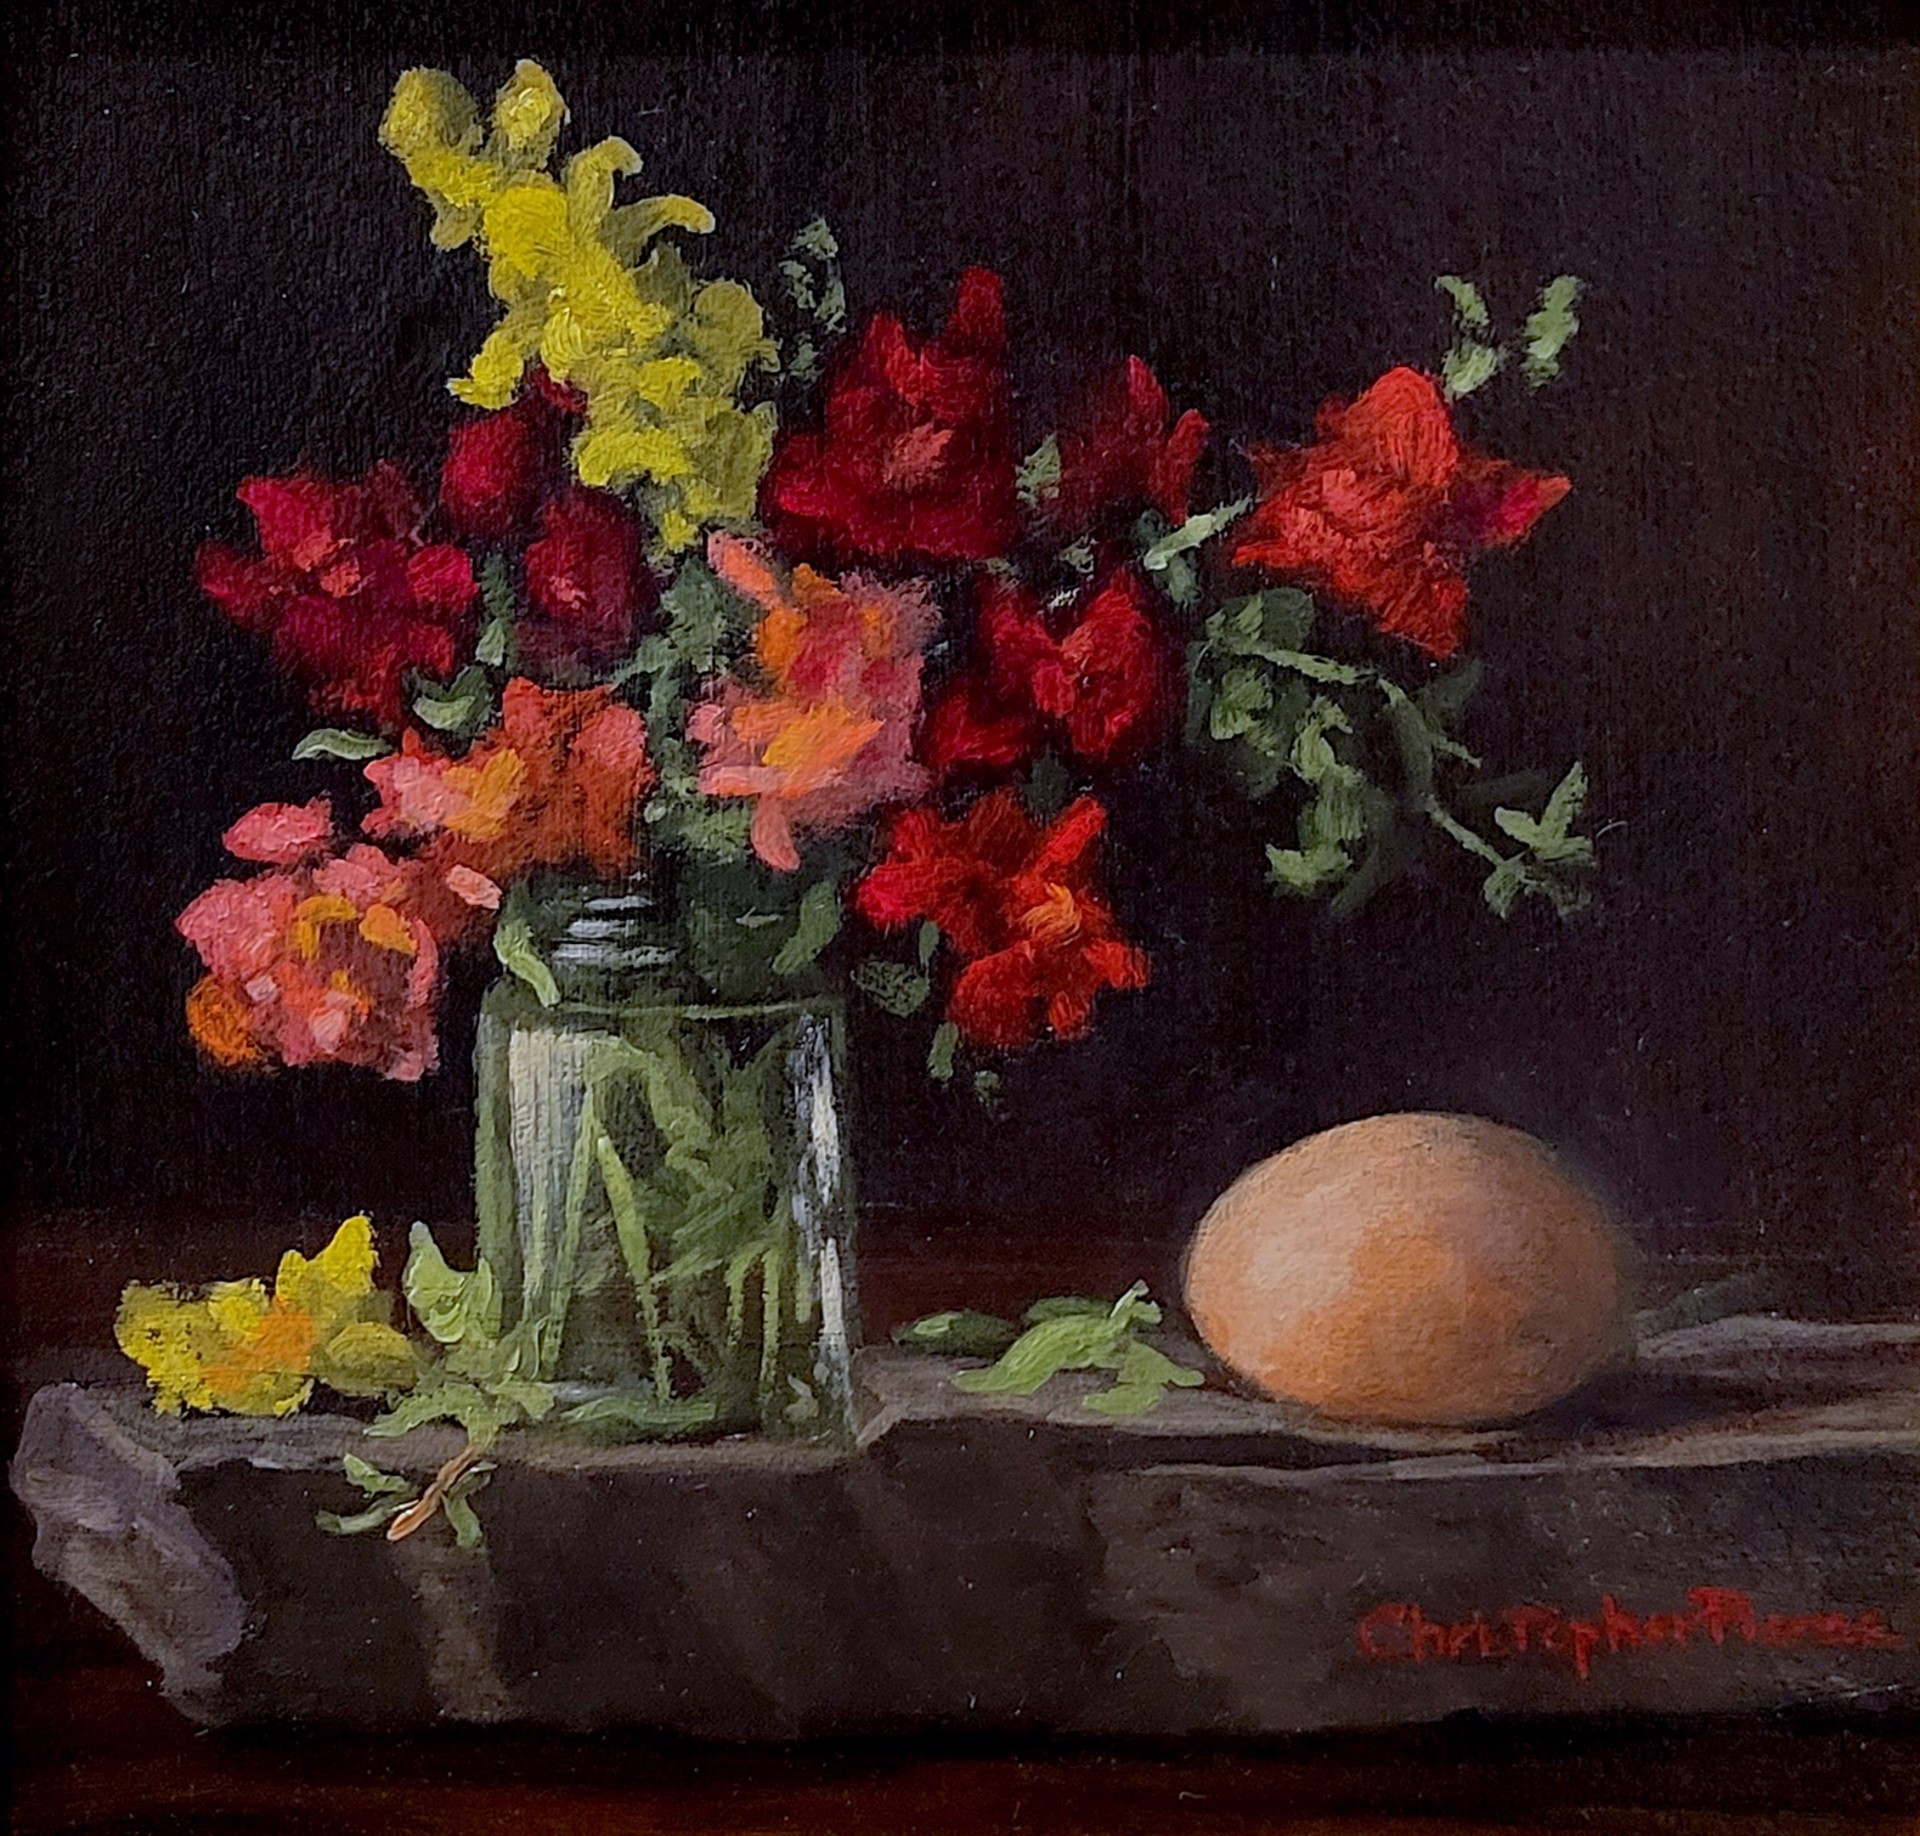 Snapdragons and Egg by Christopher Pierce